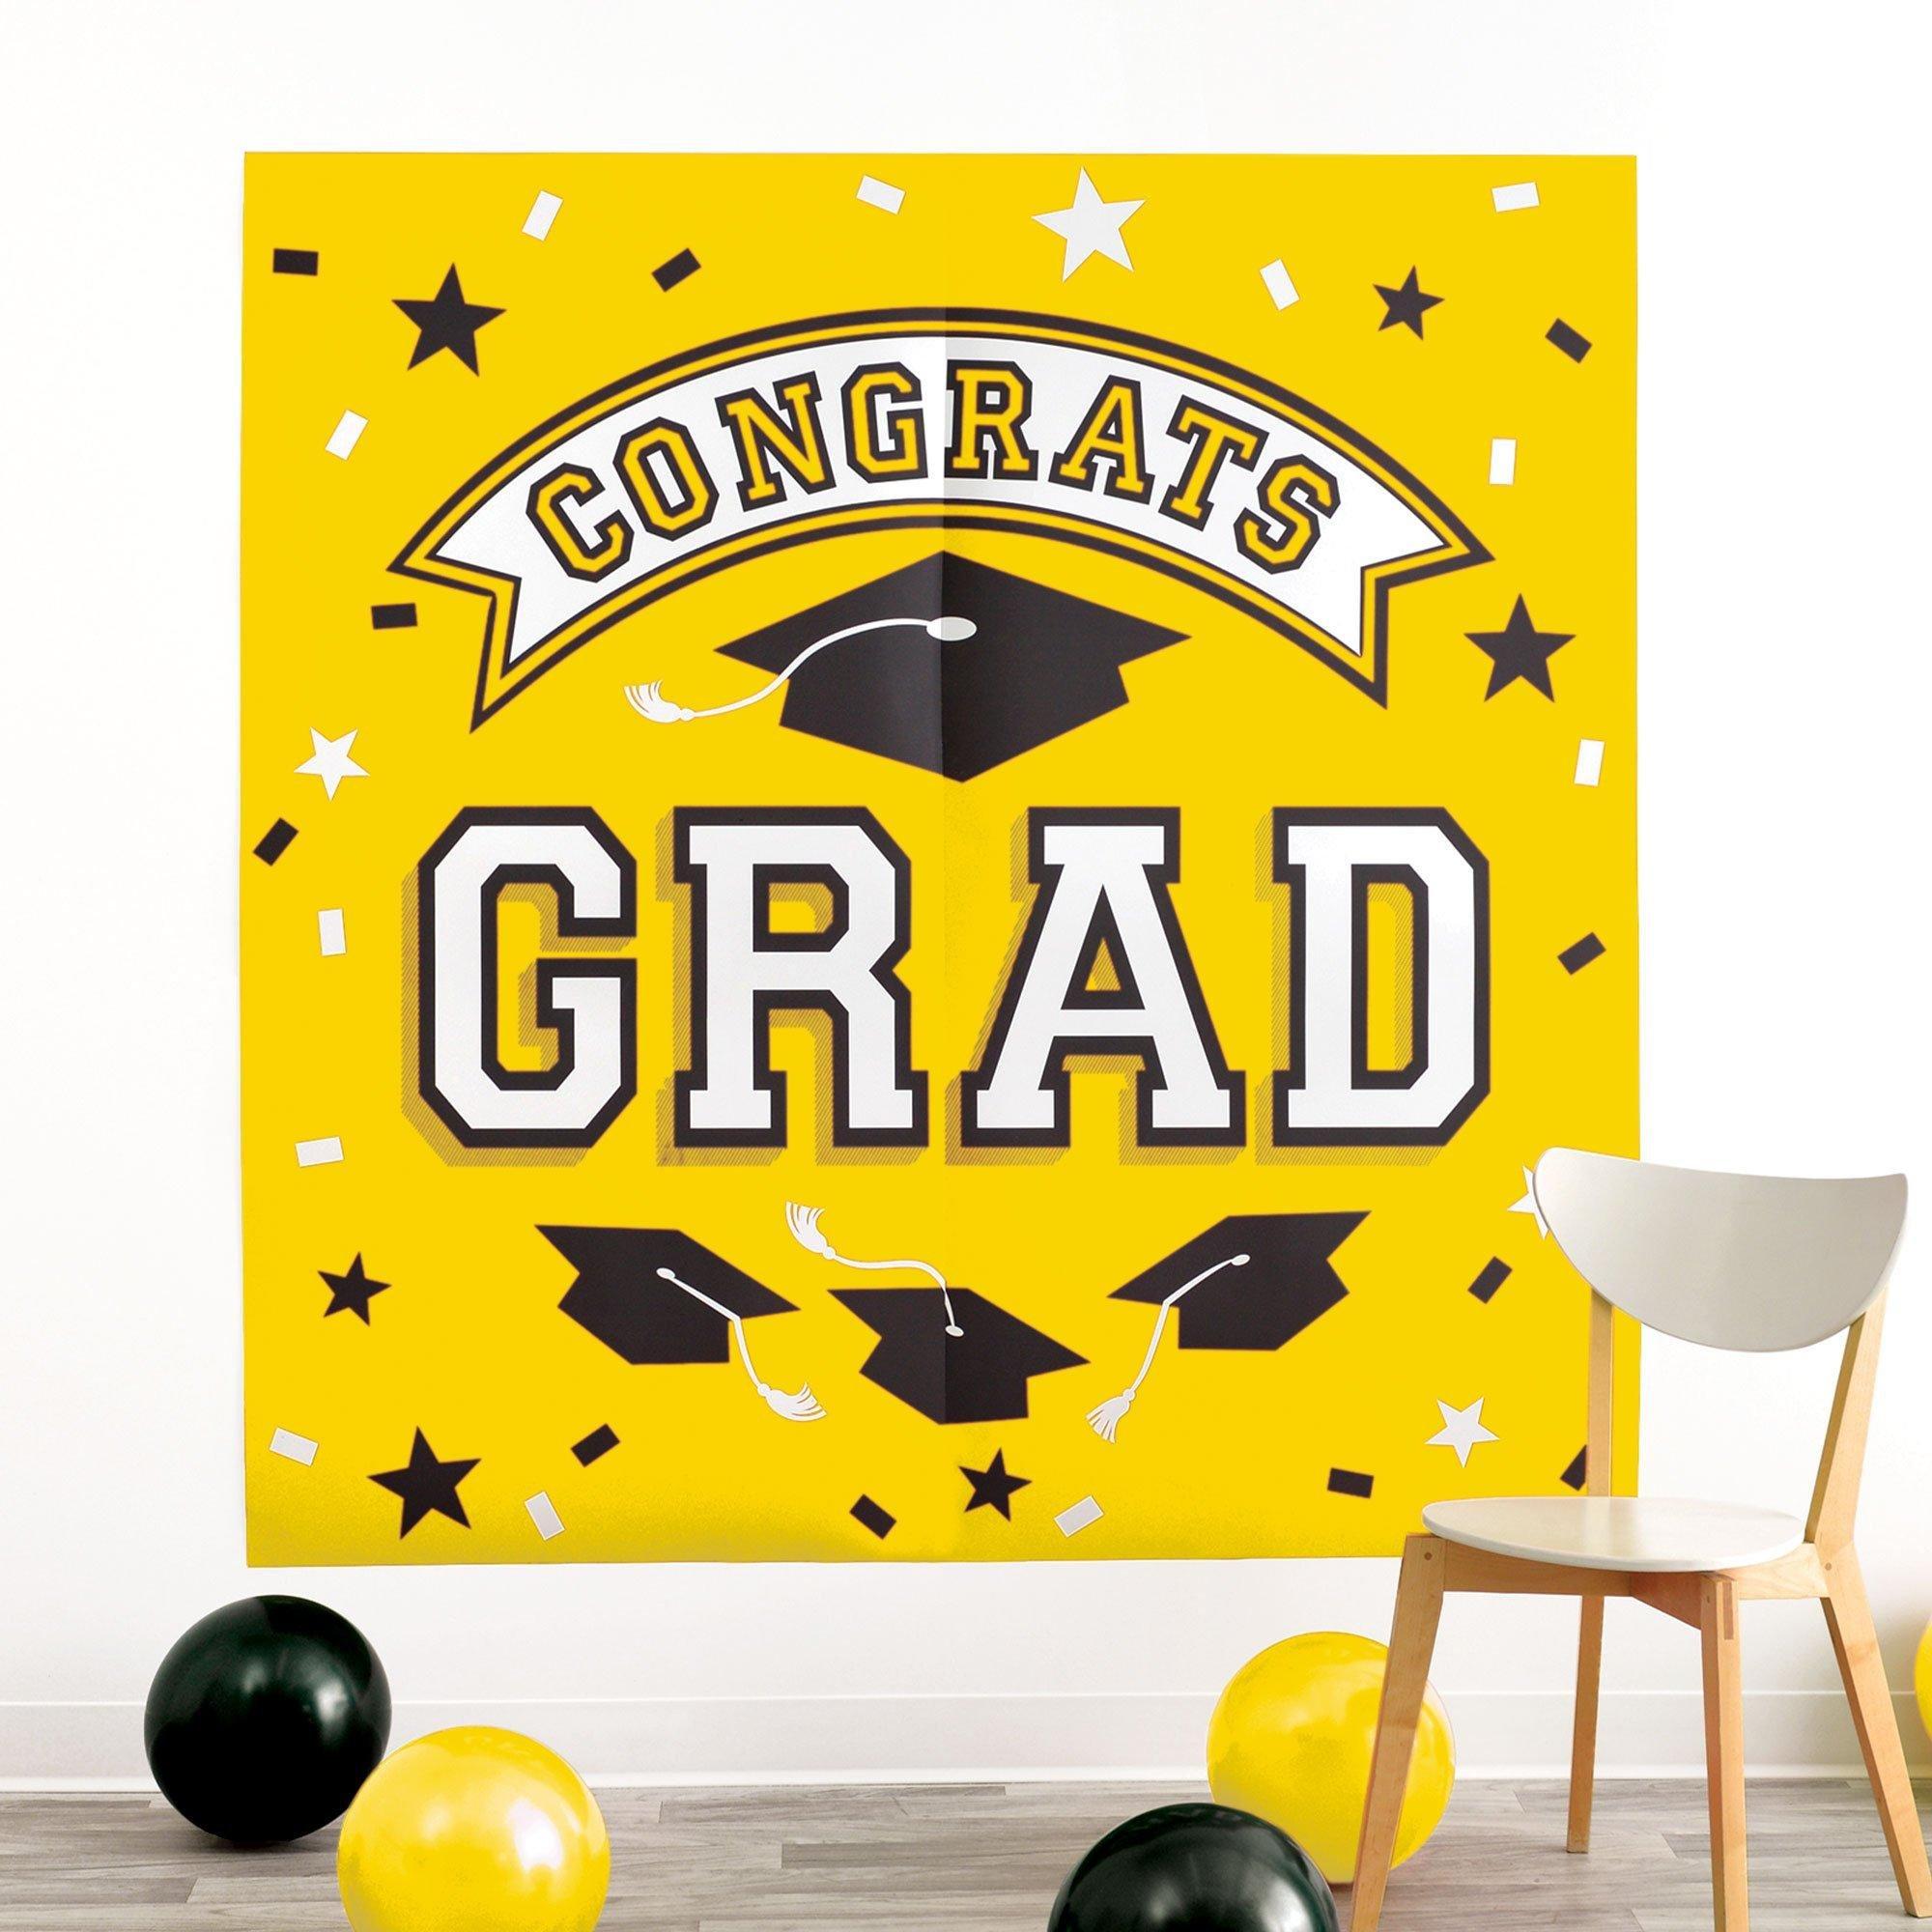 Graduation Party Supplies Kit for 20 with Decorations, Banners, Balloons, Plates, Napkins - Yellow Congrats Grad